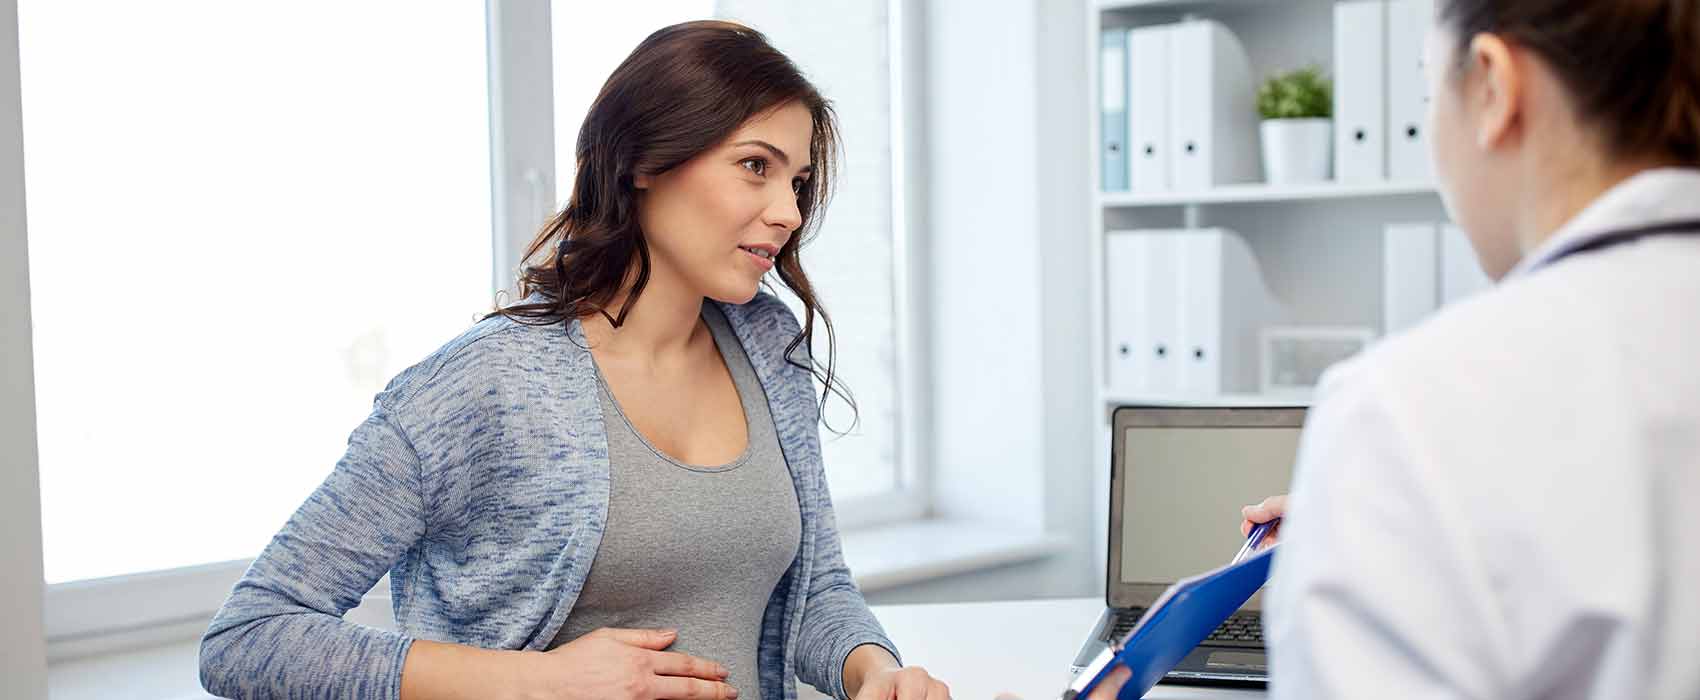 Pregnant woman discussing pelvic organ prolapse with doctor.